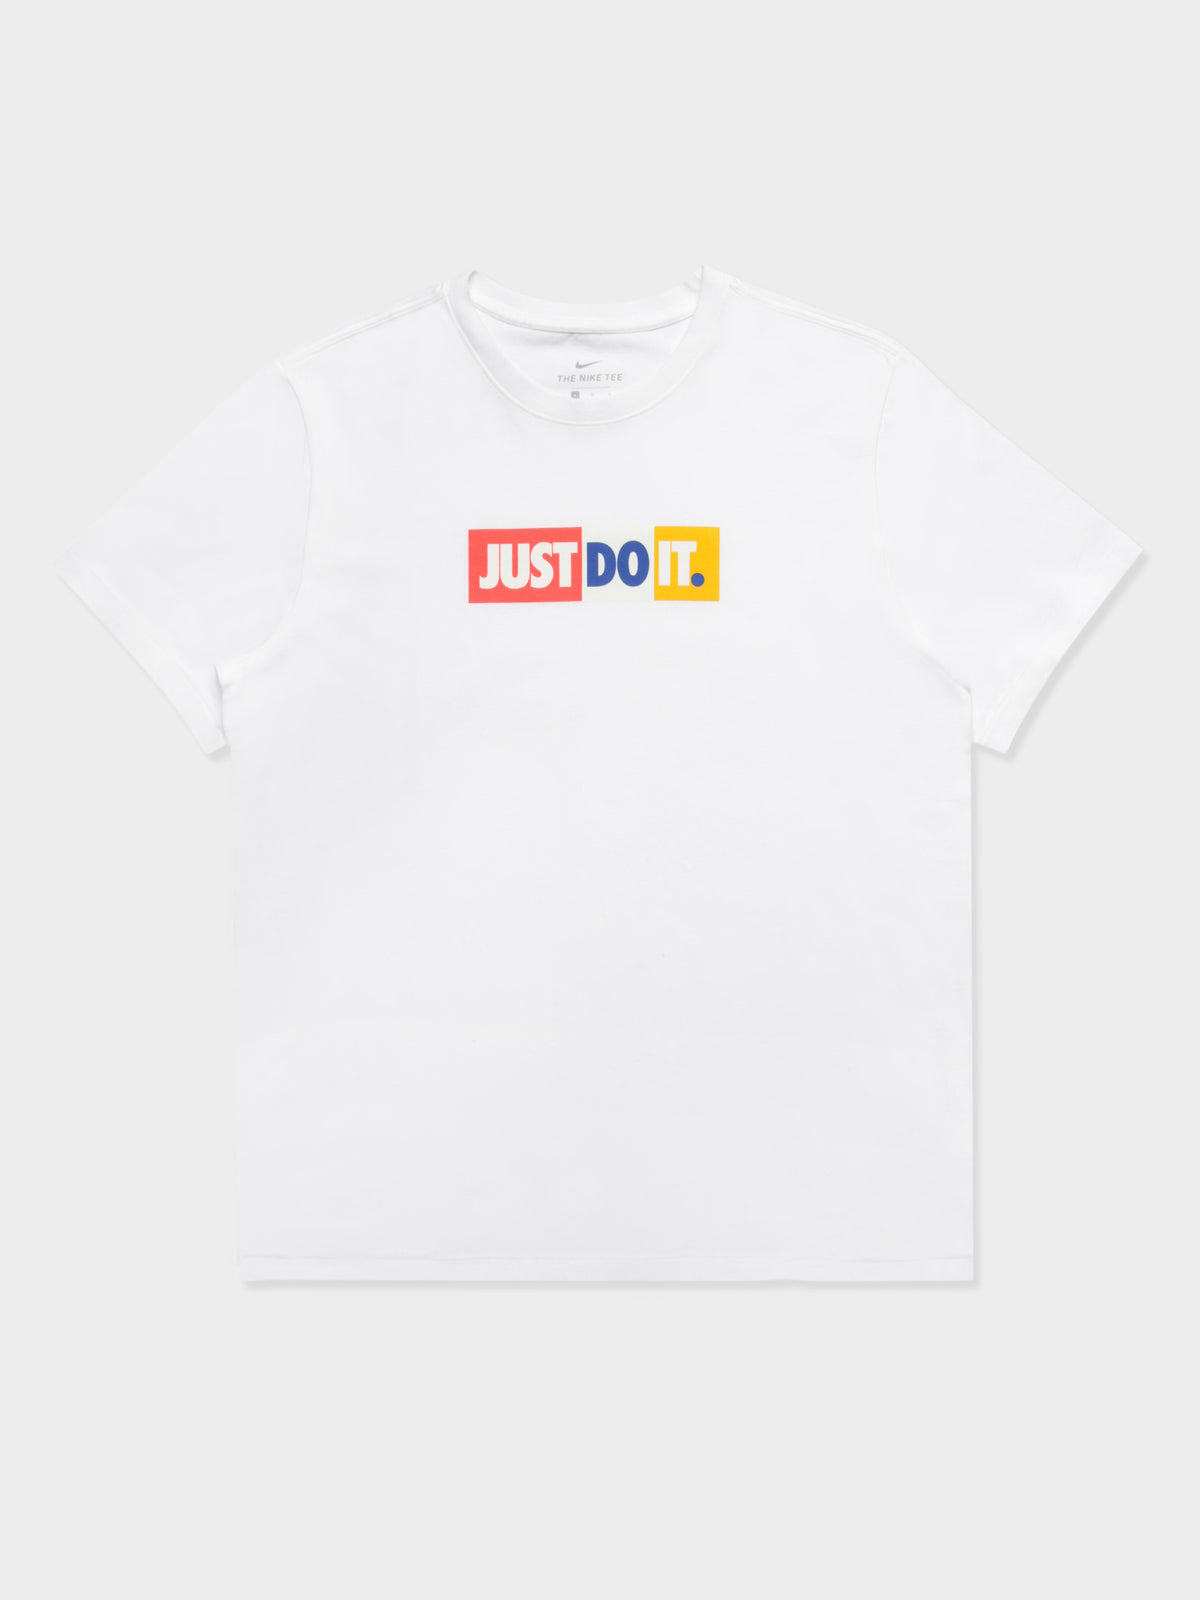 NSW Just Do It Bumper T-Shirt in White